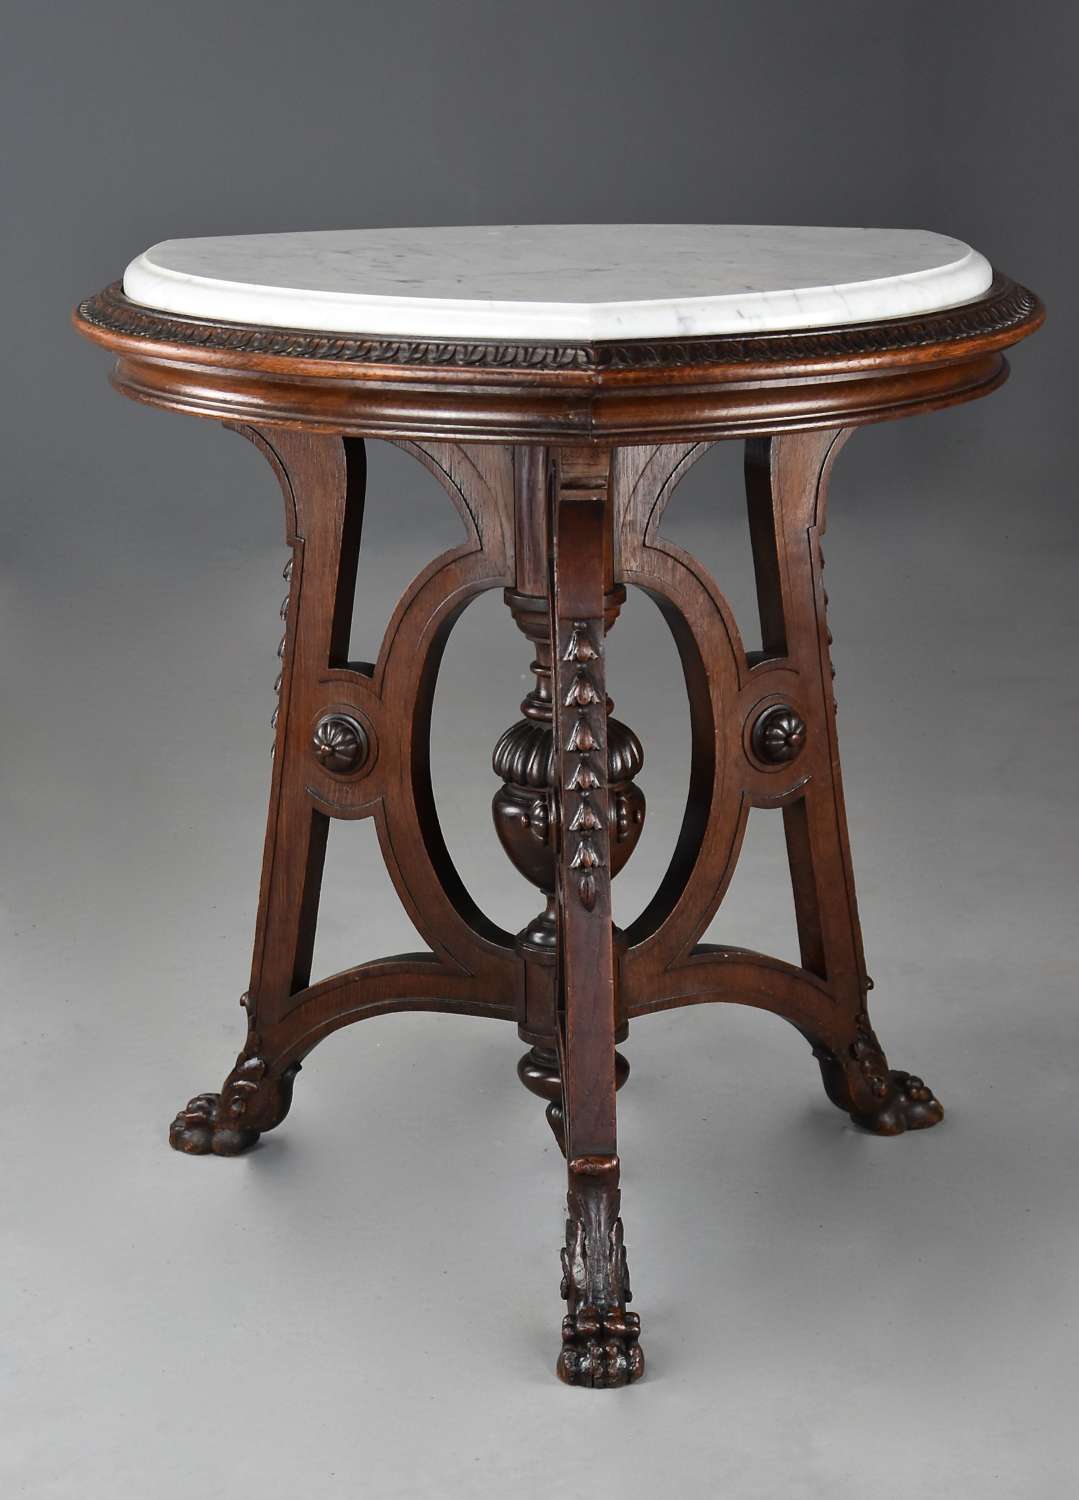 Late 19thc superb Arts & Crafts oak centre table with marble top